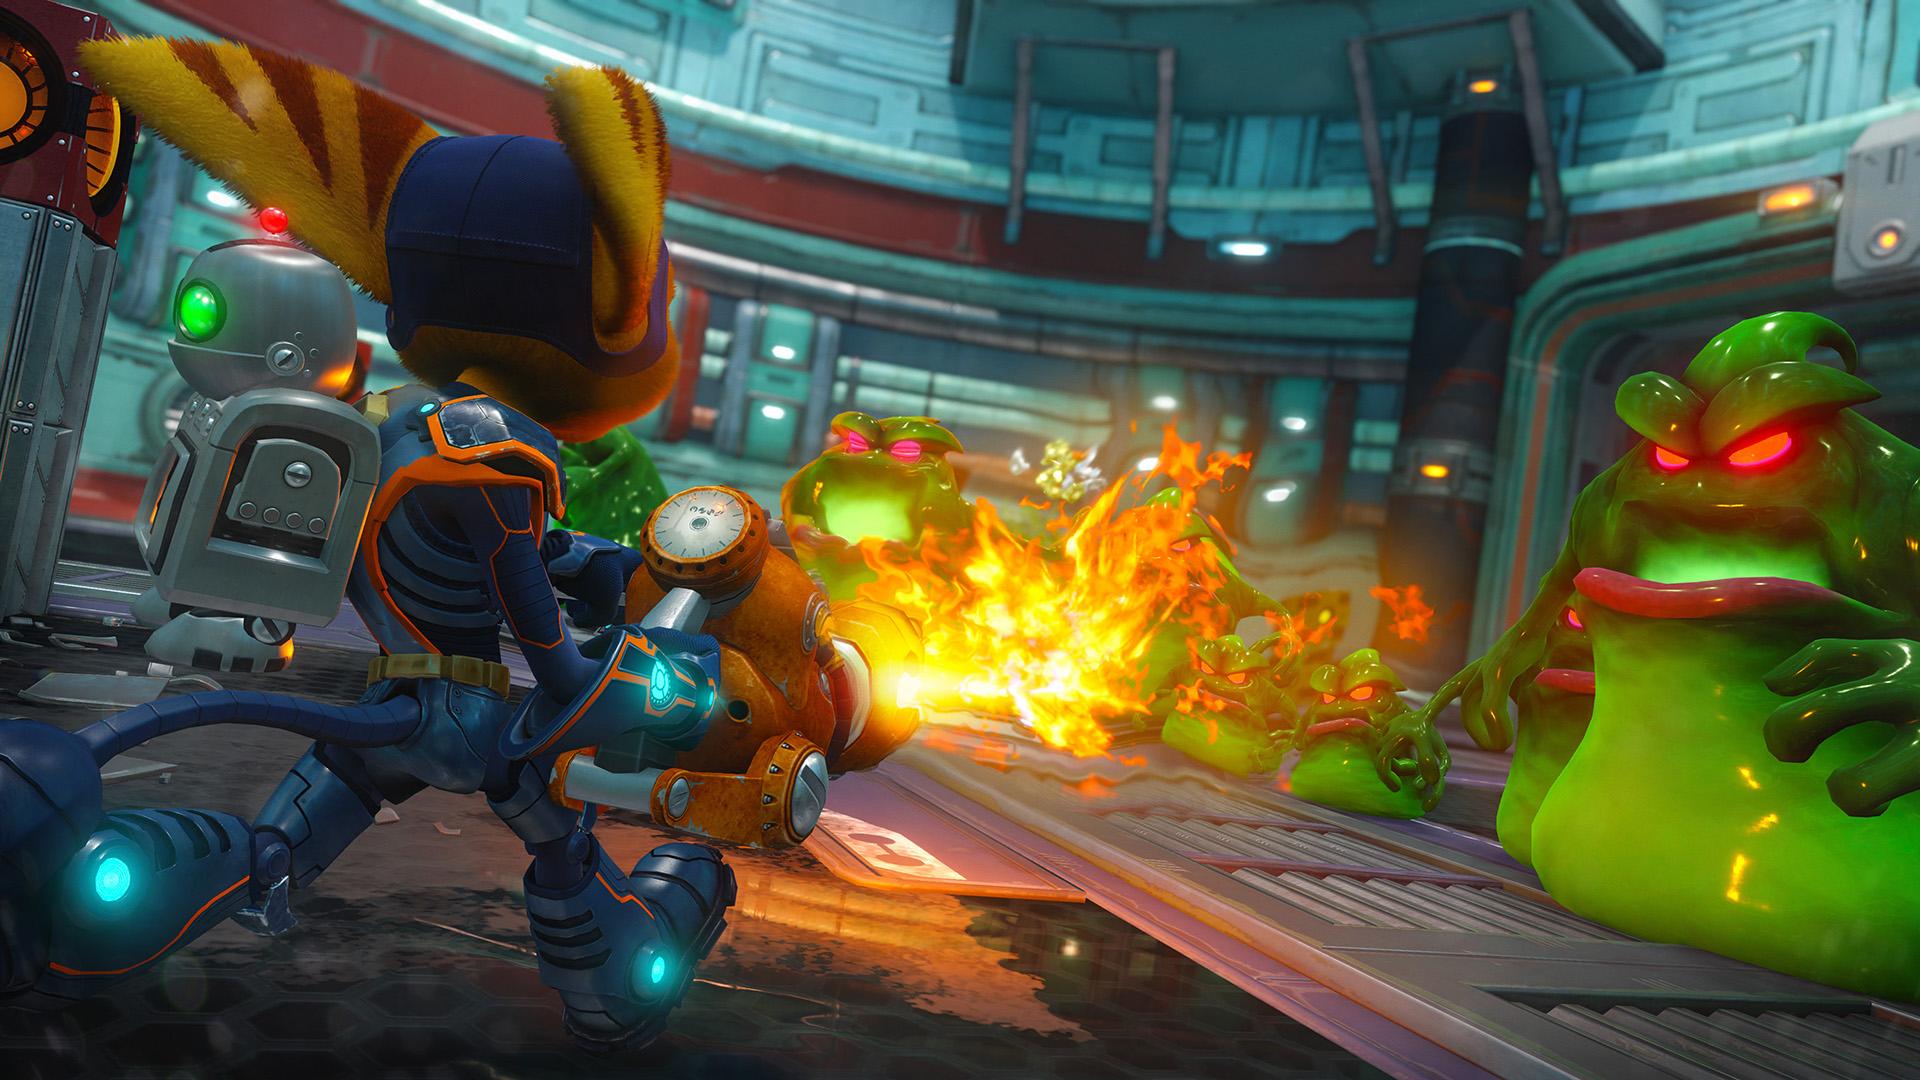 Ratchet and clank pc game downloard free - dexlasopa